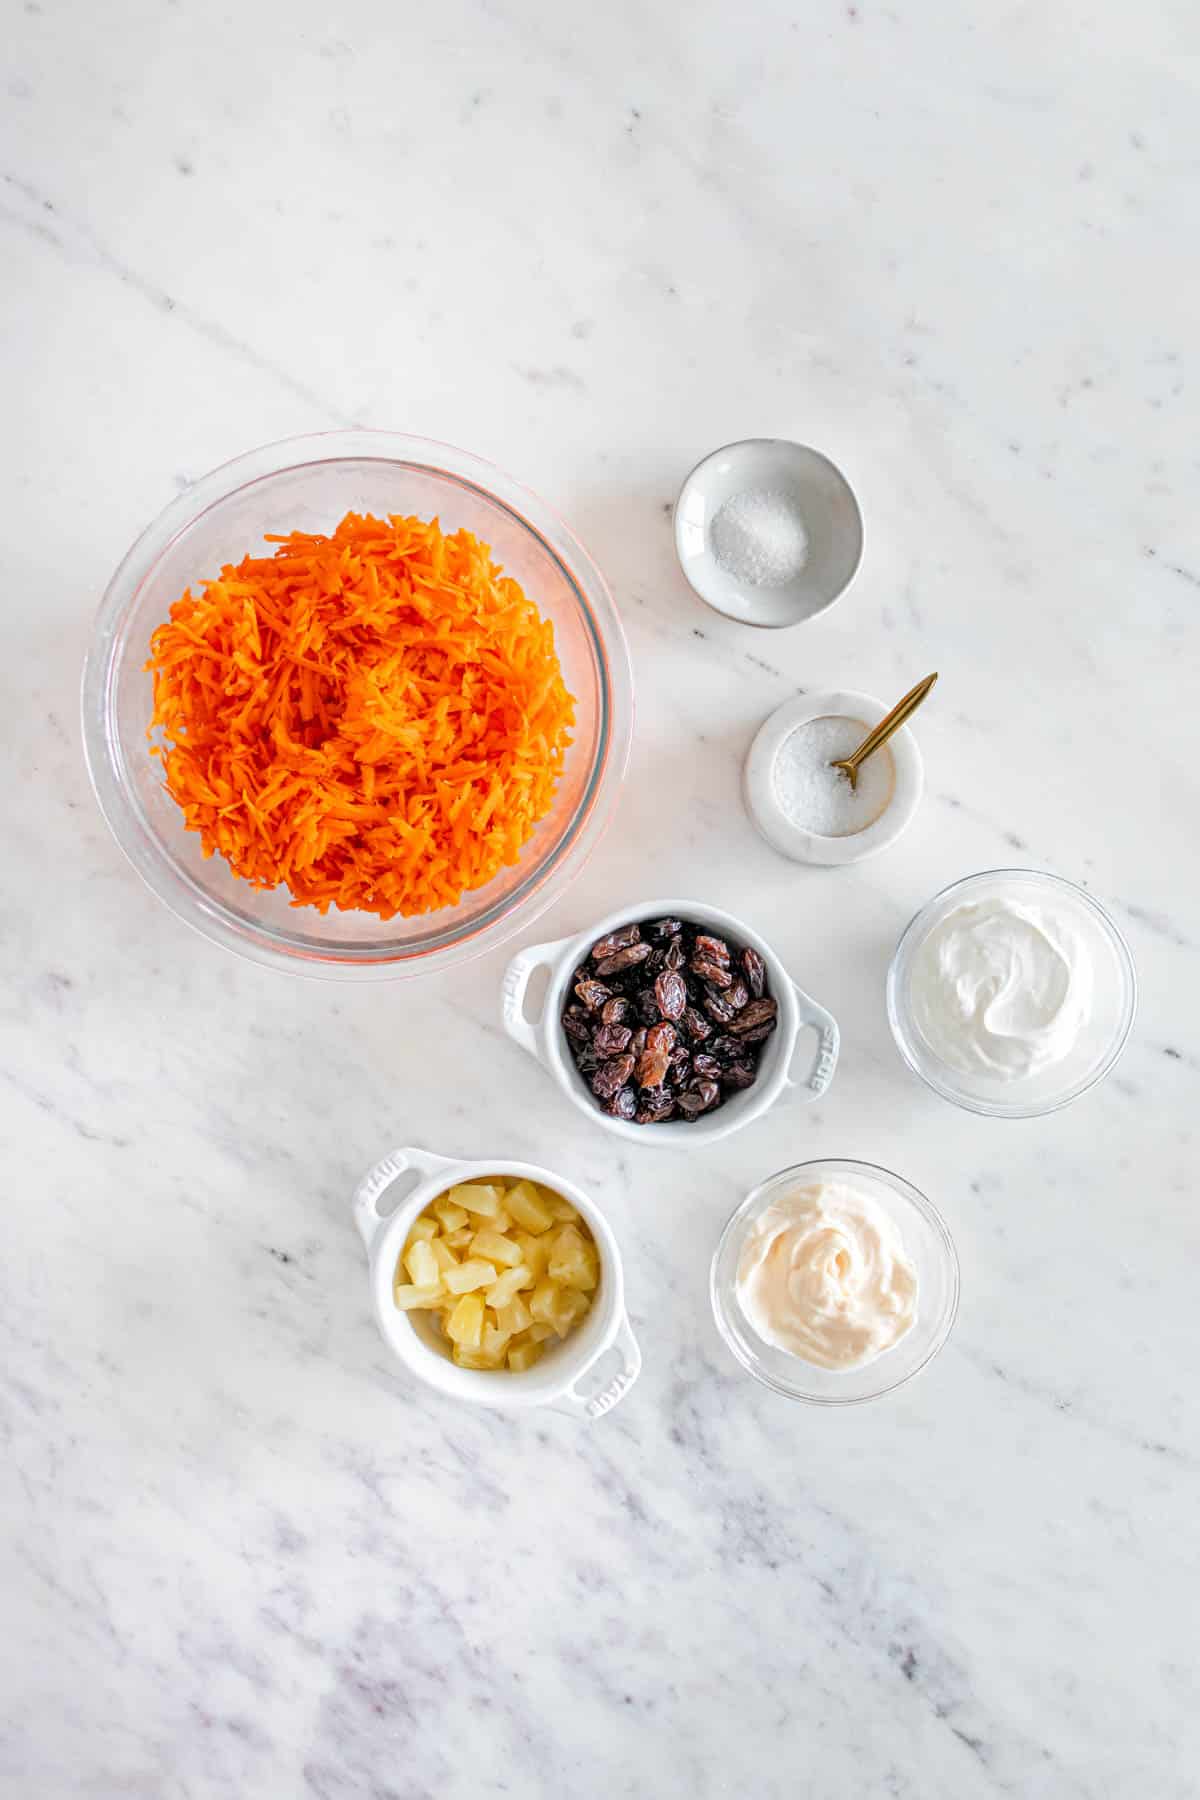 A bowl of carrots, raisins and other ingredients on a marble countertop.